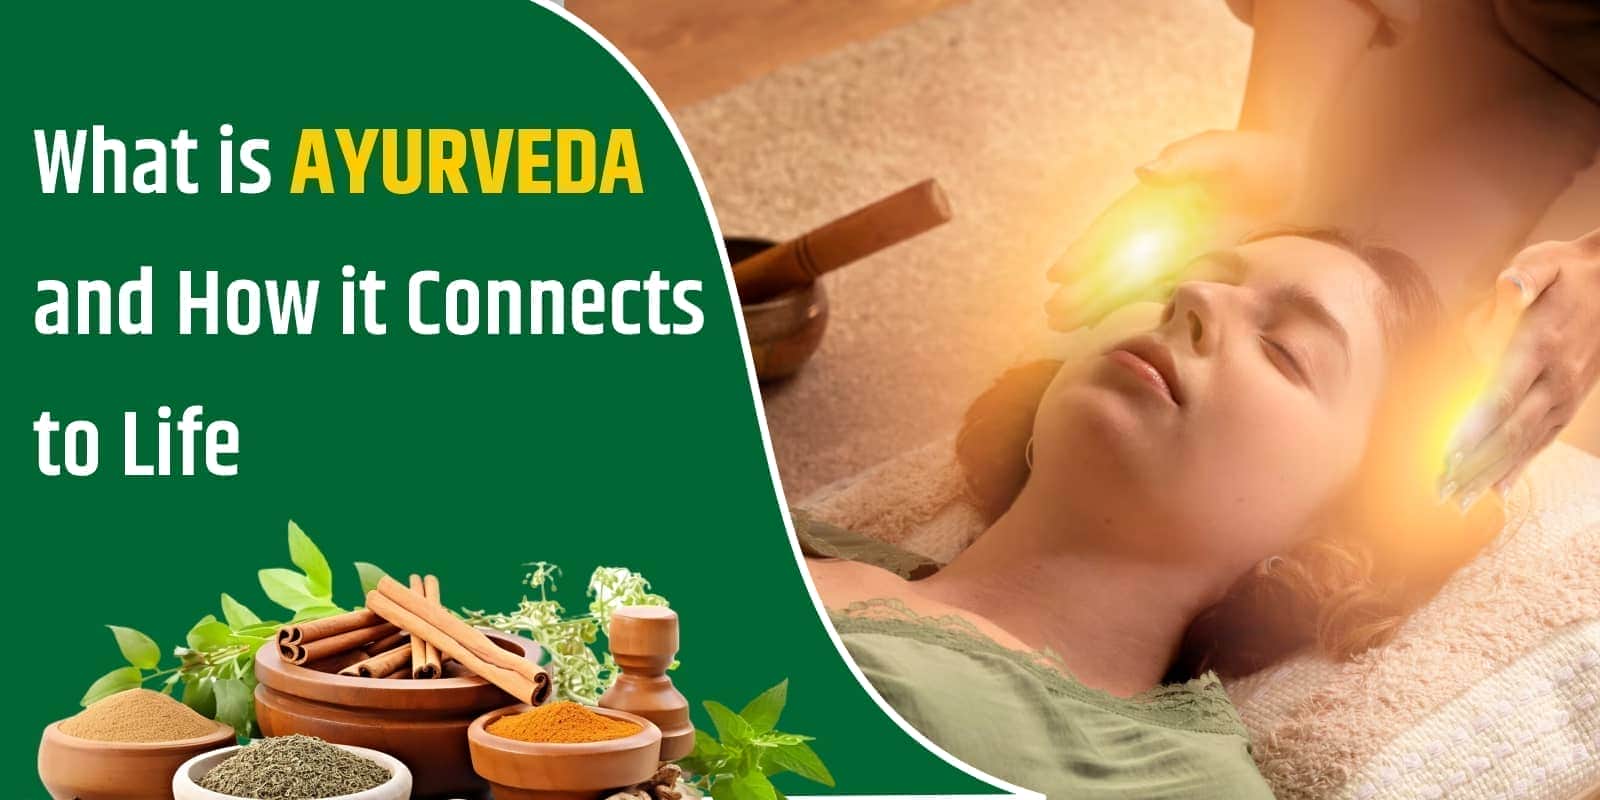 What is Ayurveda and How it Connects to Life